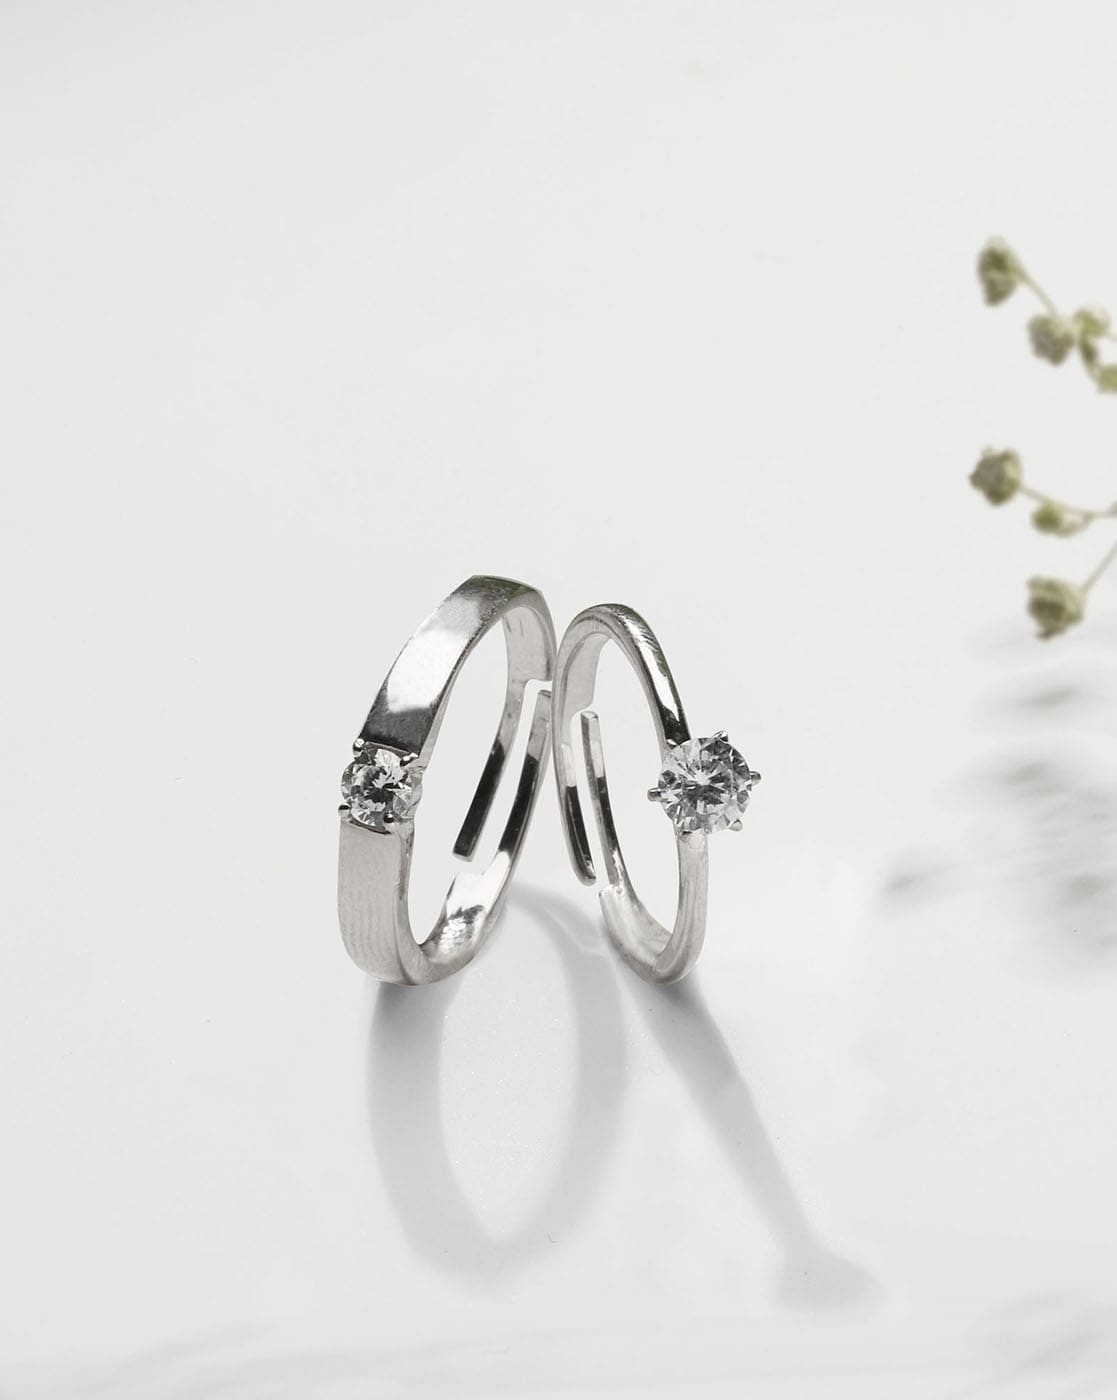 Designer S925 Couple Rings With Box 3 Diamond Versions For Men And Women  INS Wind Urbanic Couple Rings Plain Design 2023 New Arrival From  Blingbling0627, $20.11 | DHgate.Com